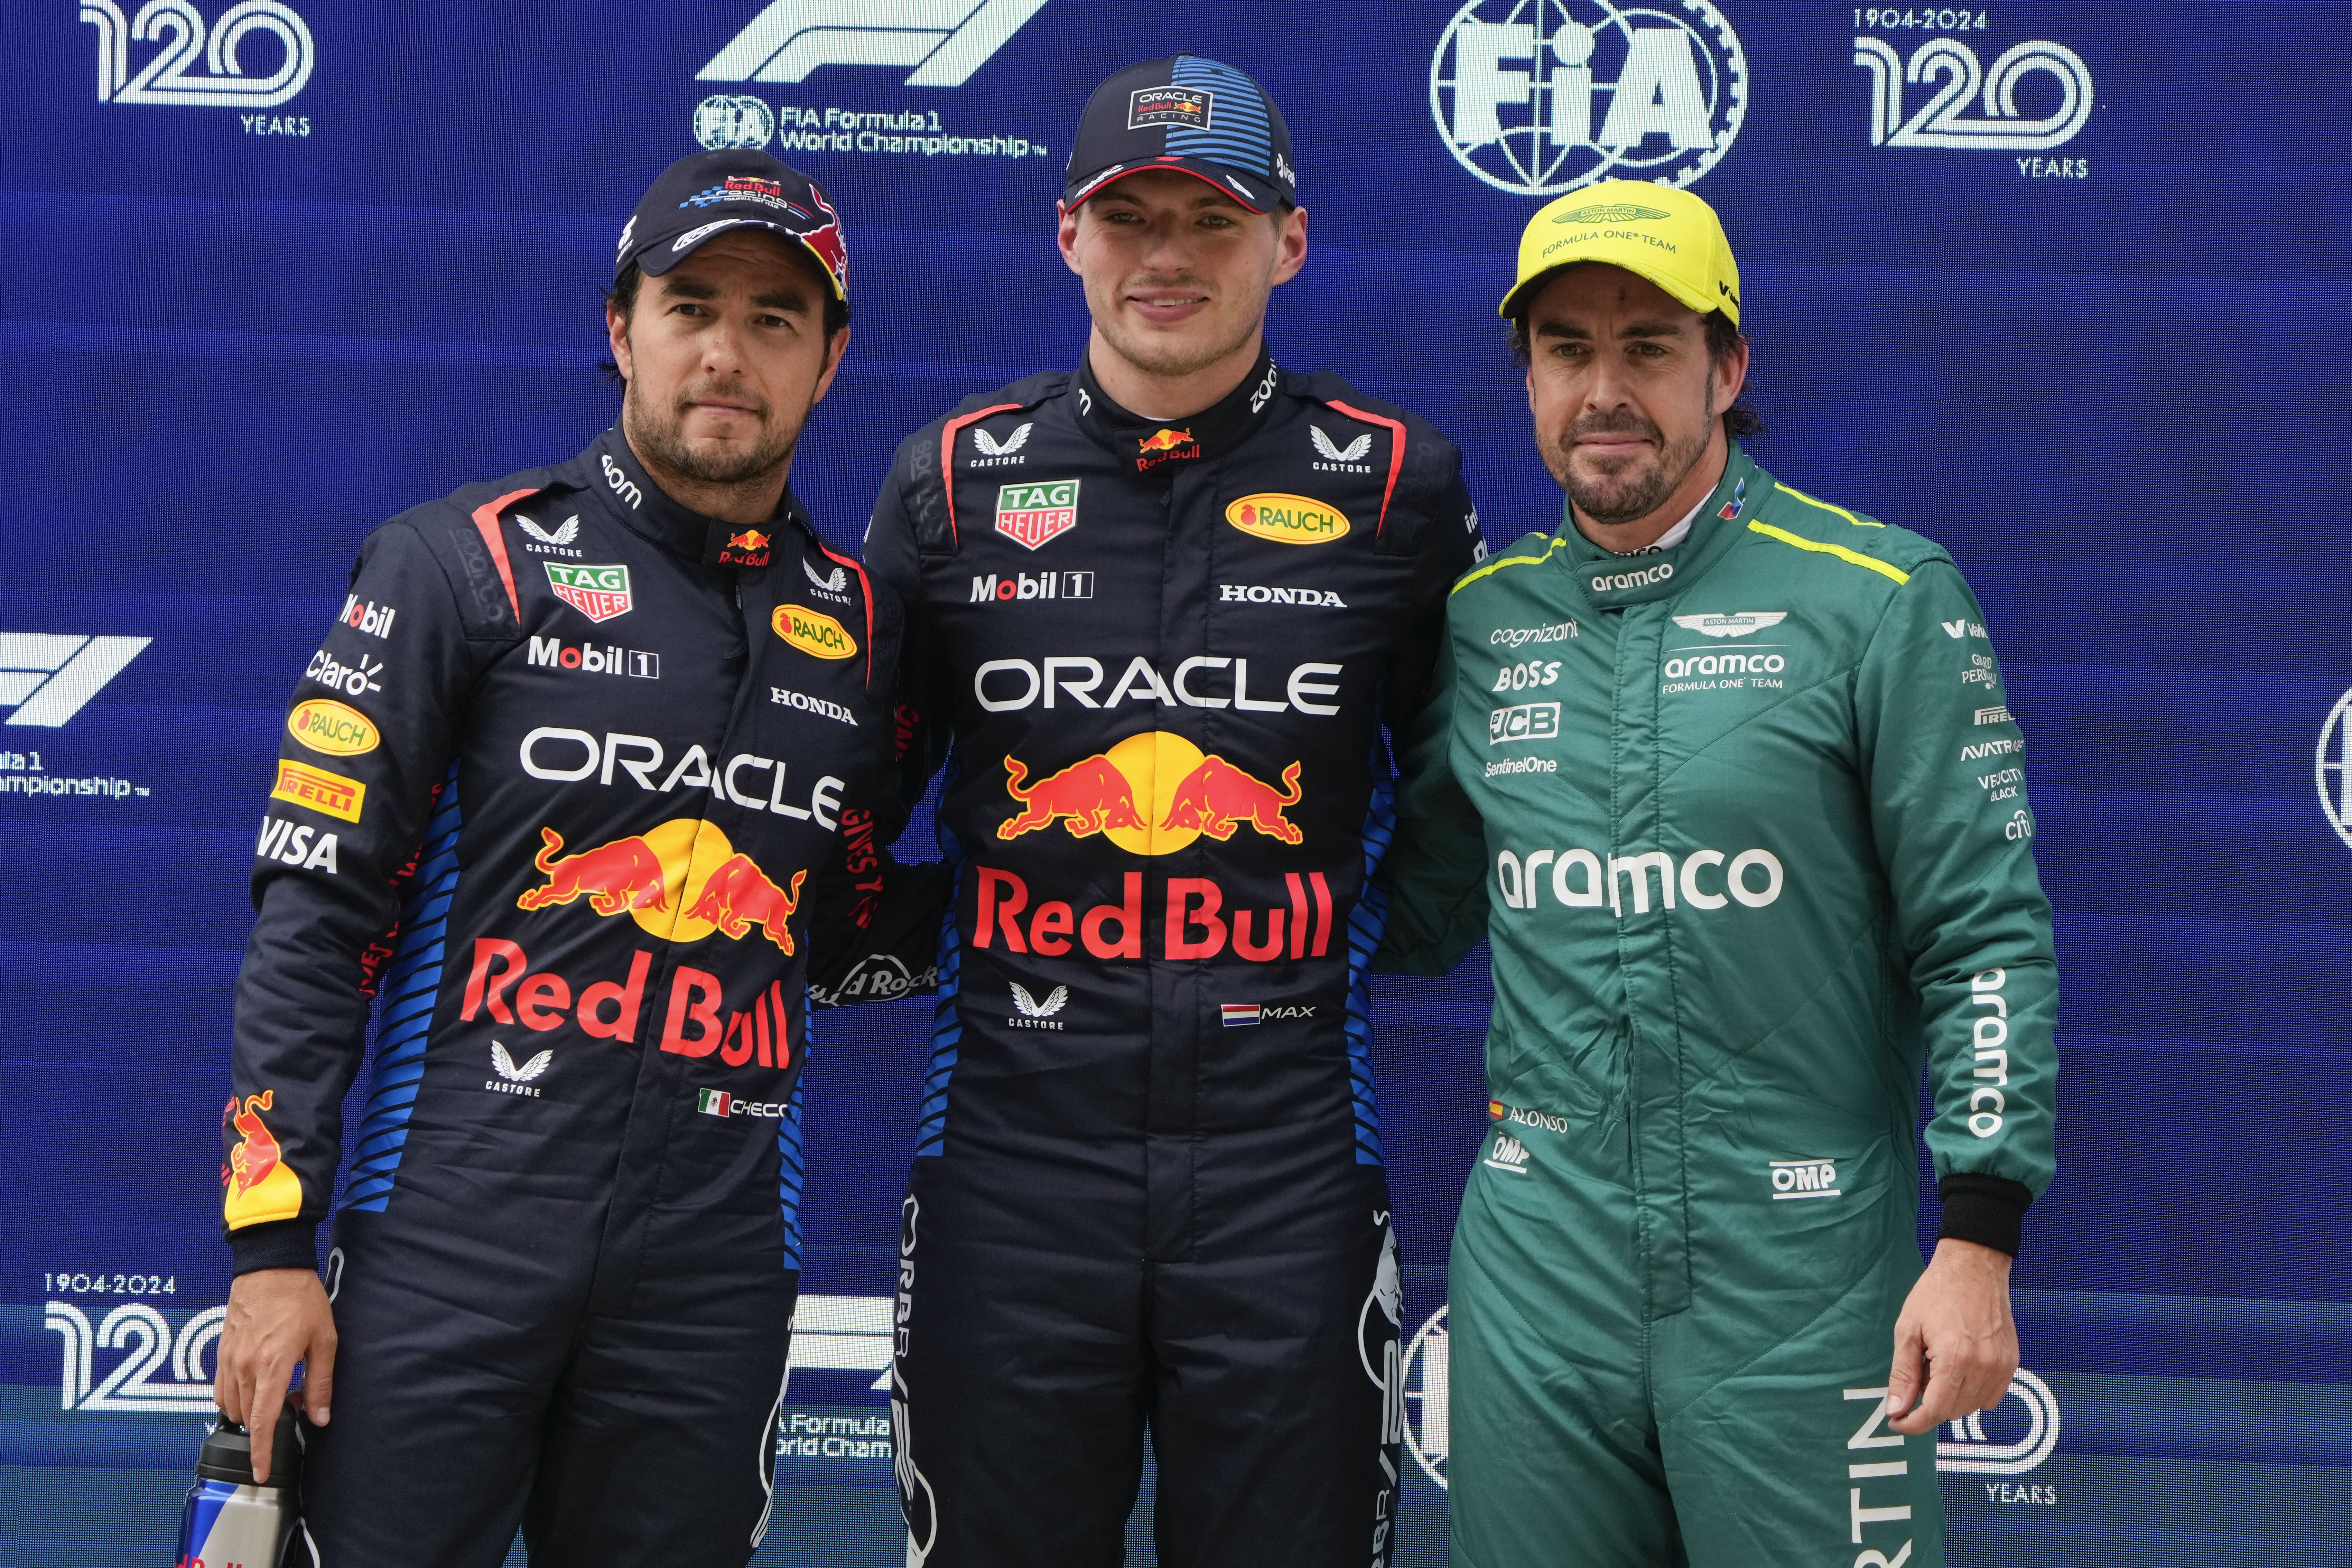 Verstappen beat Perez and Alonso to China Grand Prix pole position